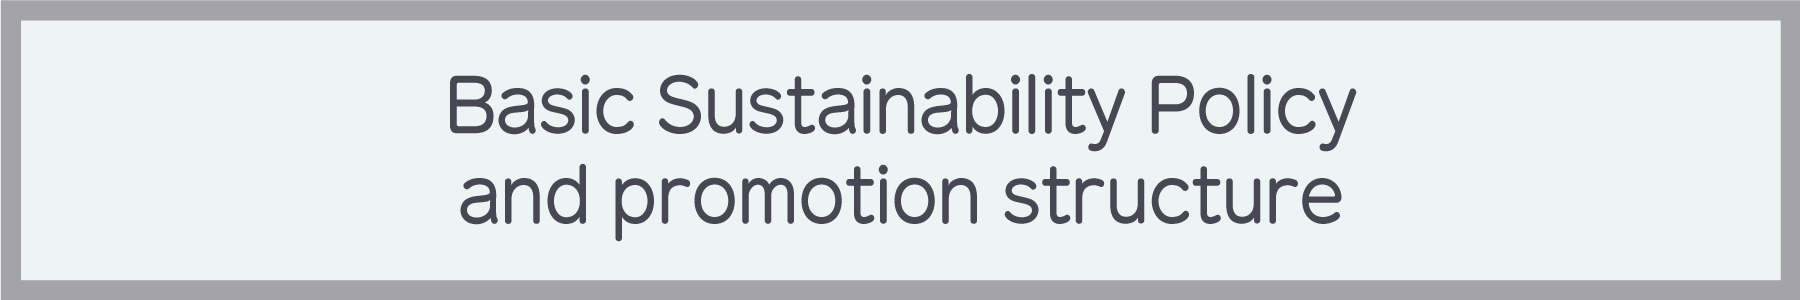 Basic Sustainability Policy and promotion structure